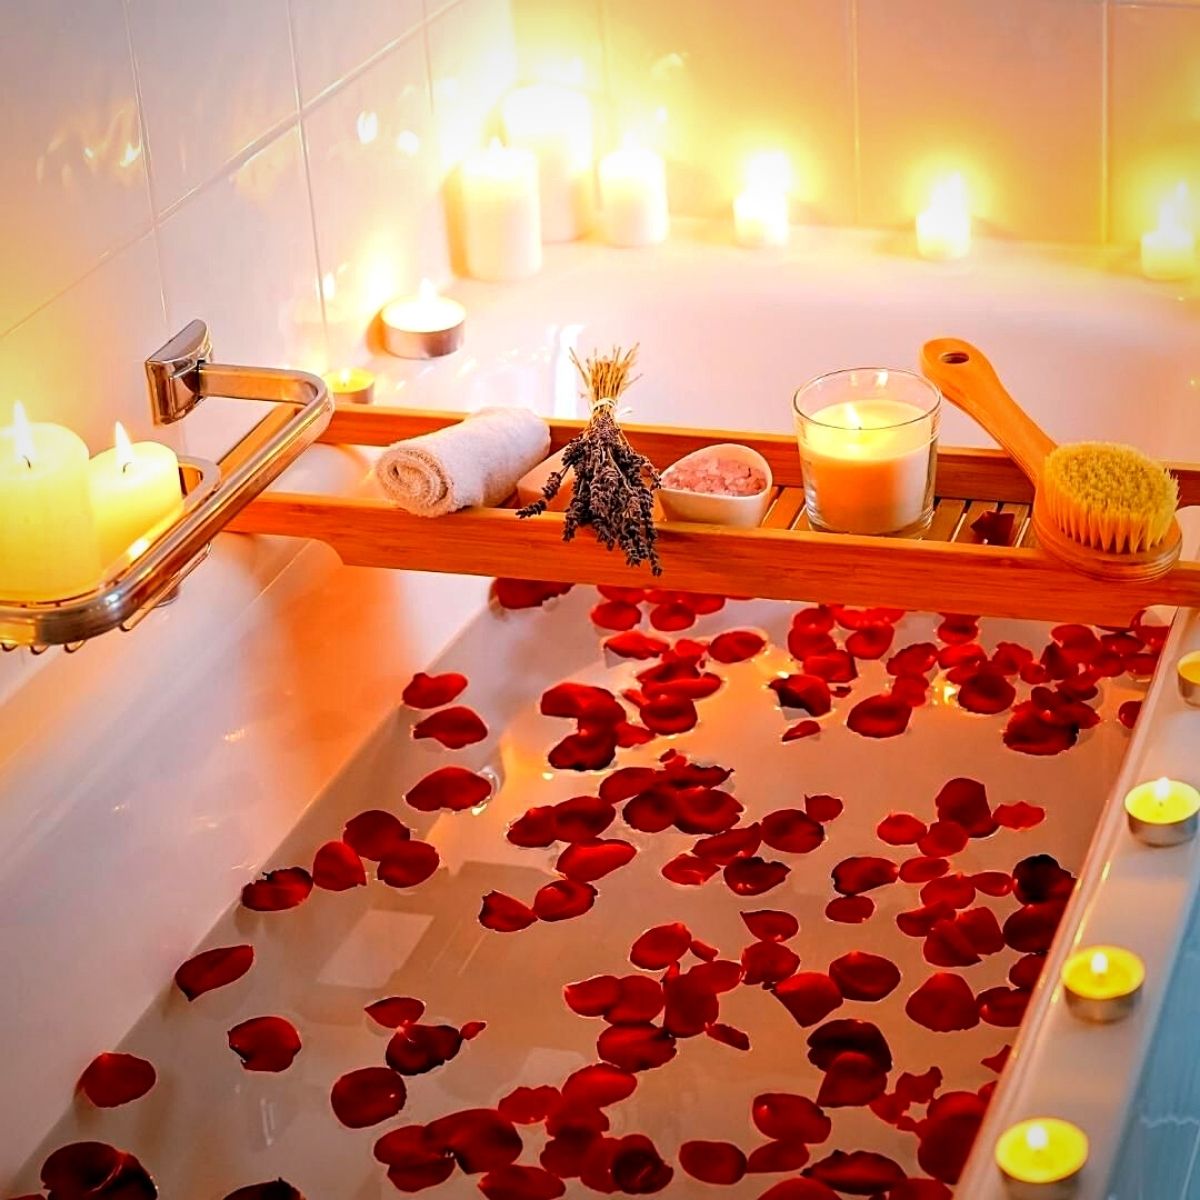 Celebrate national red rose day with a red rose petal bath